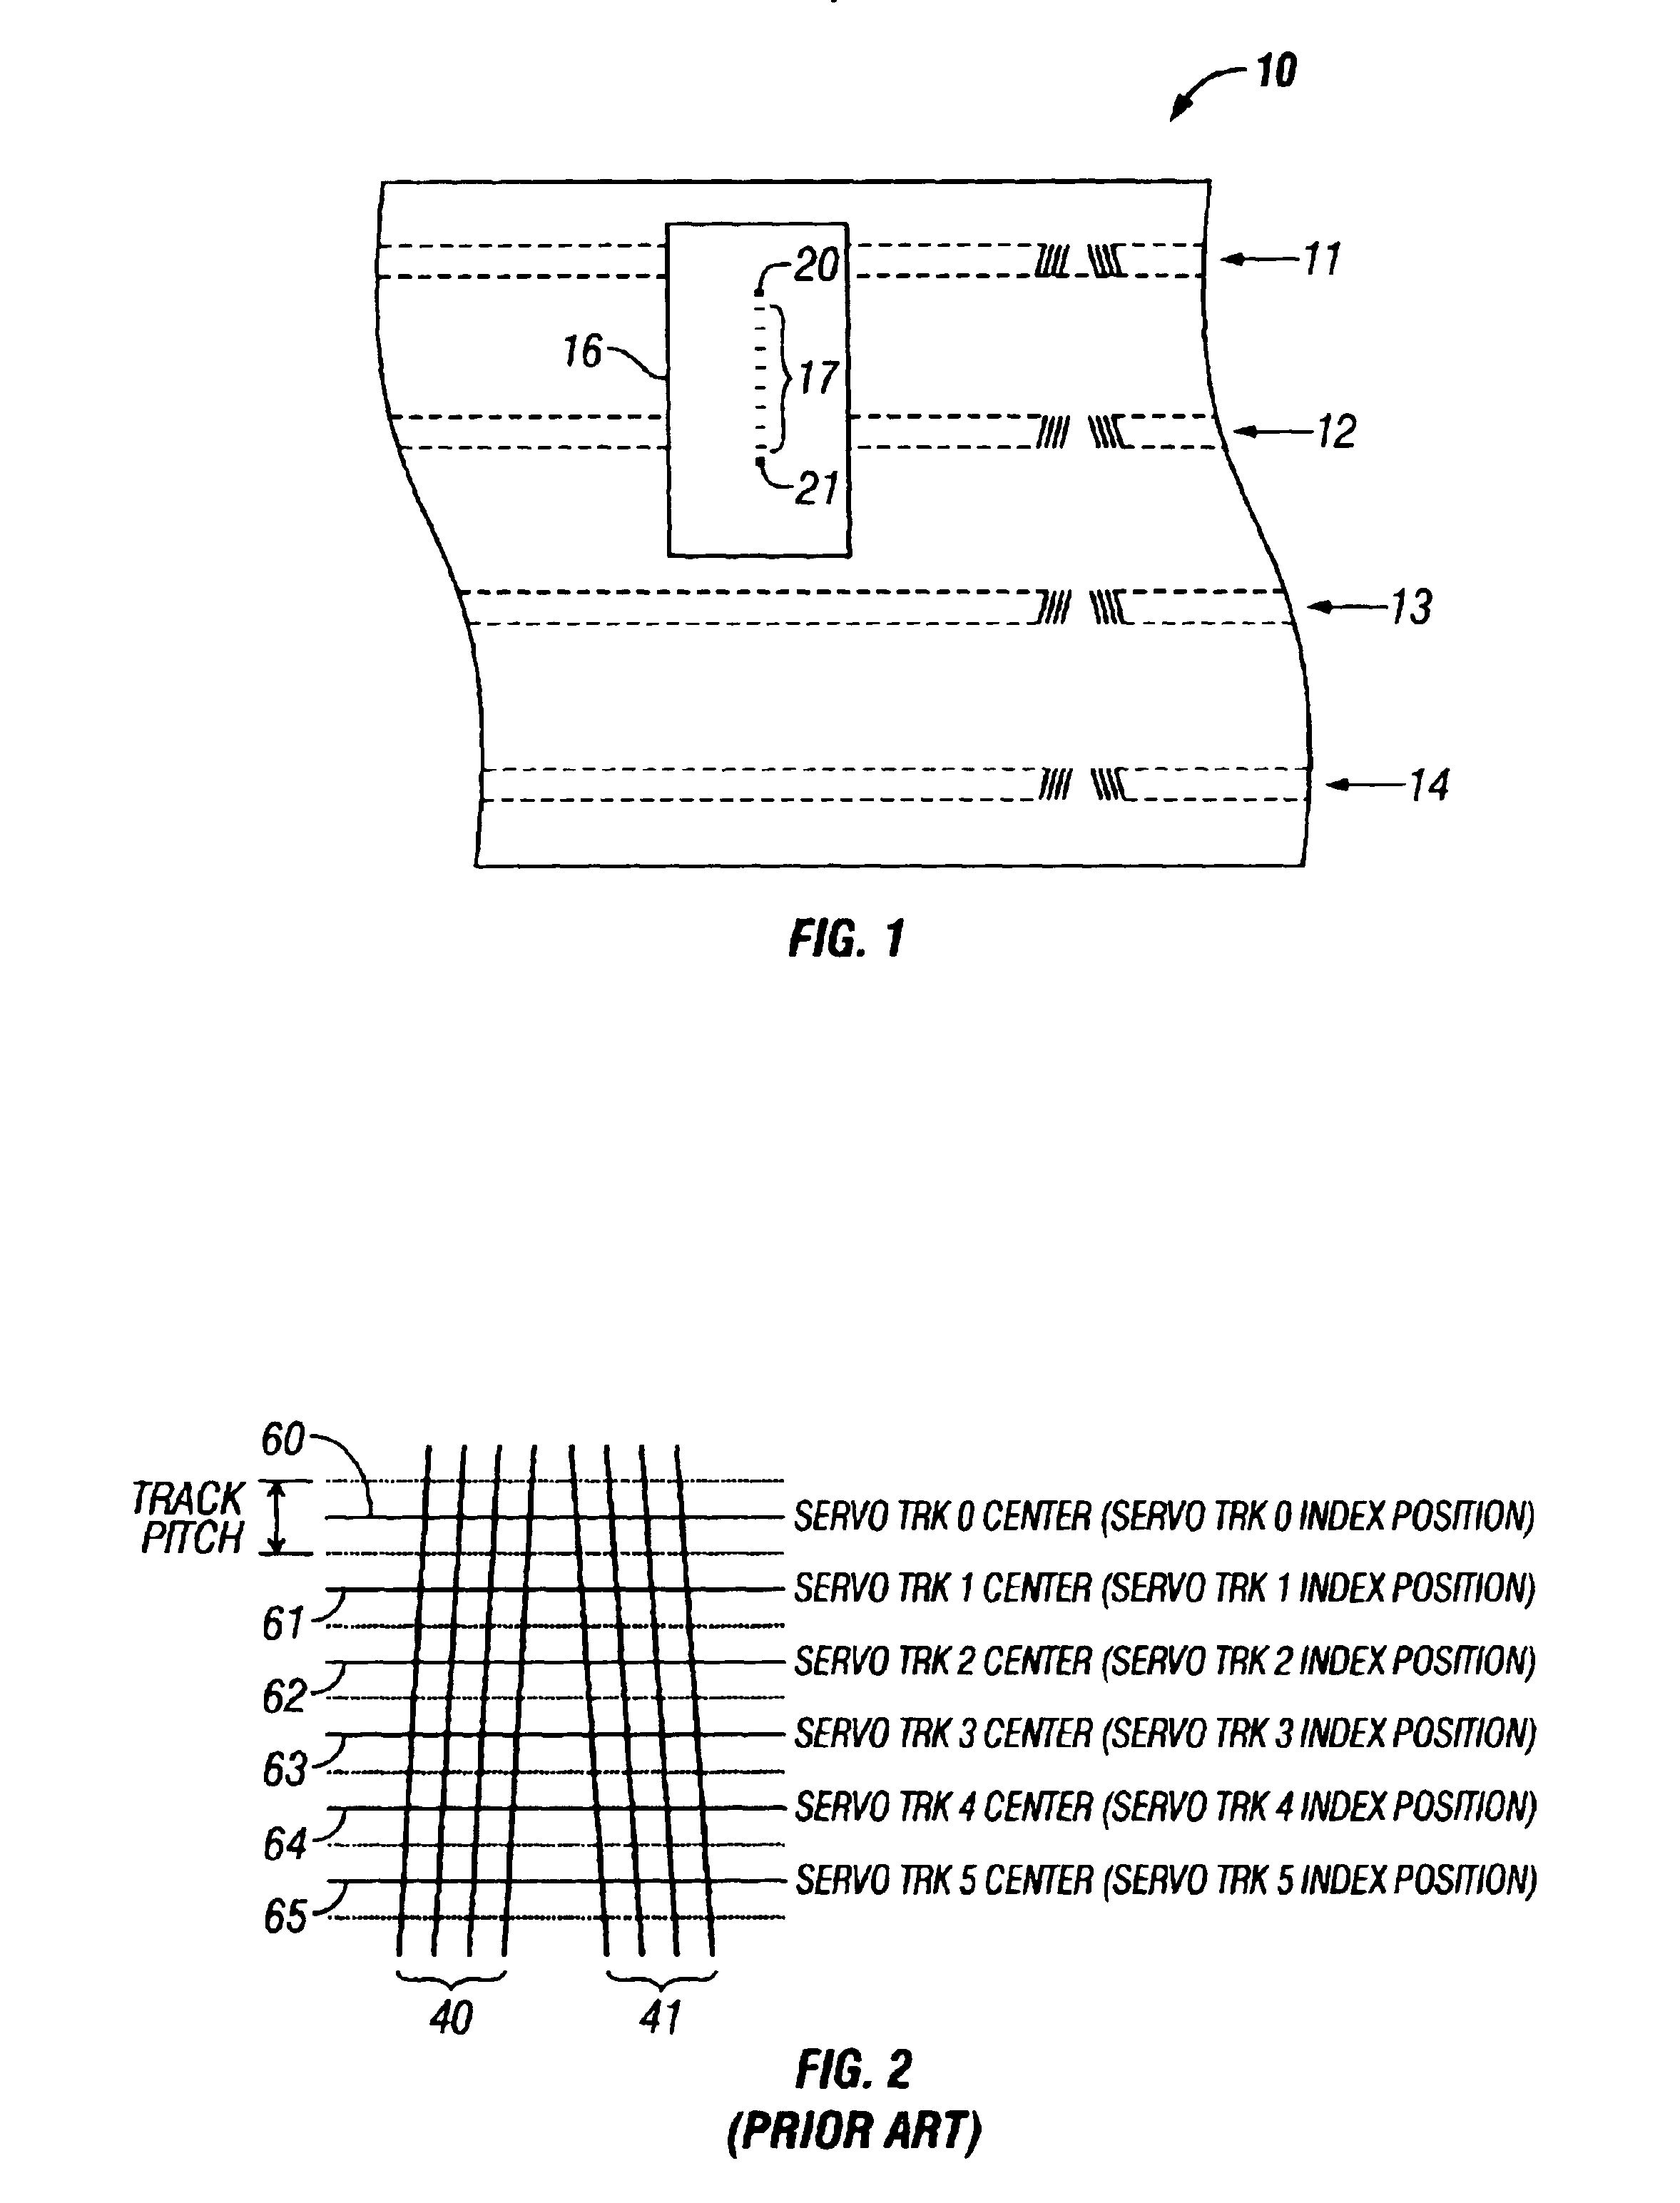 Data read transducers for determining lateral position of a tape head with respect to longitudinal servo bands of magnetic tape